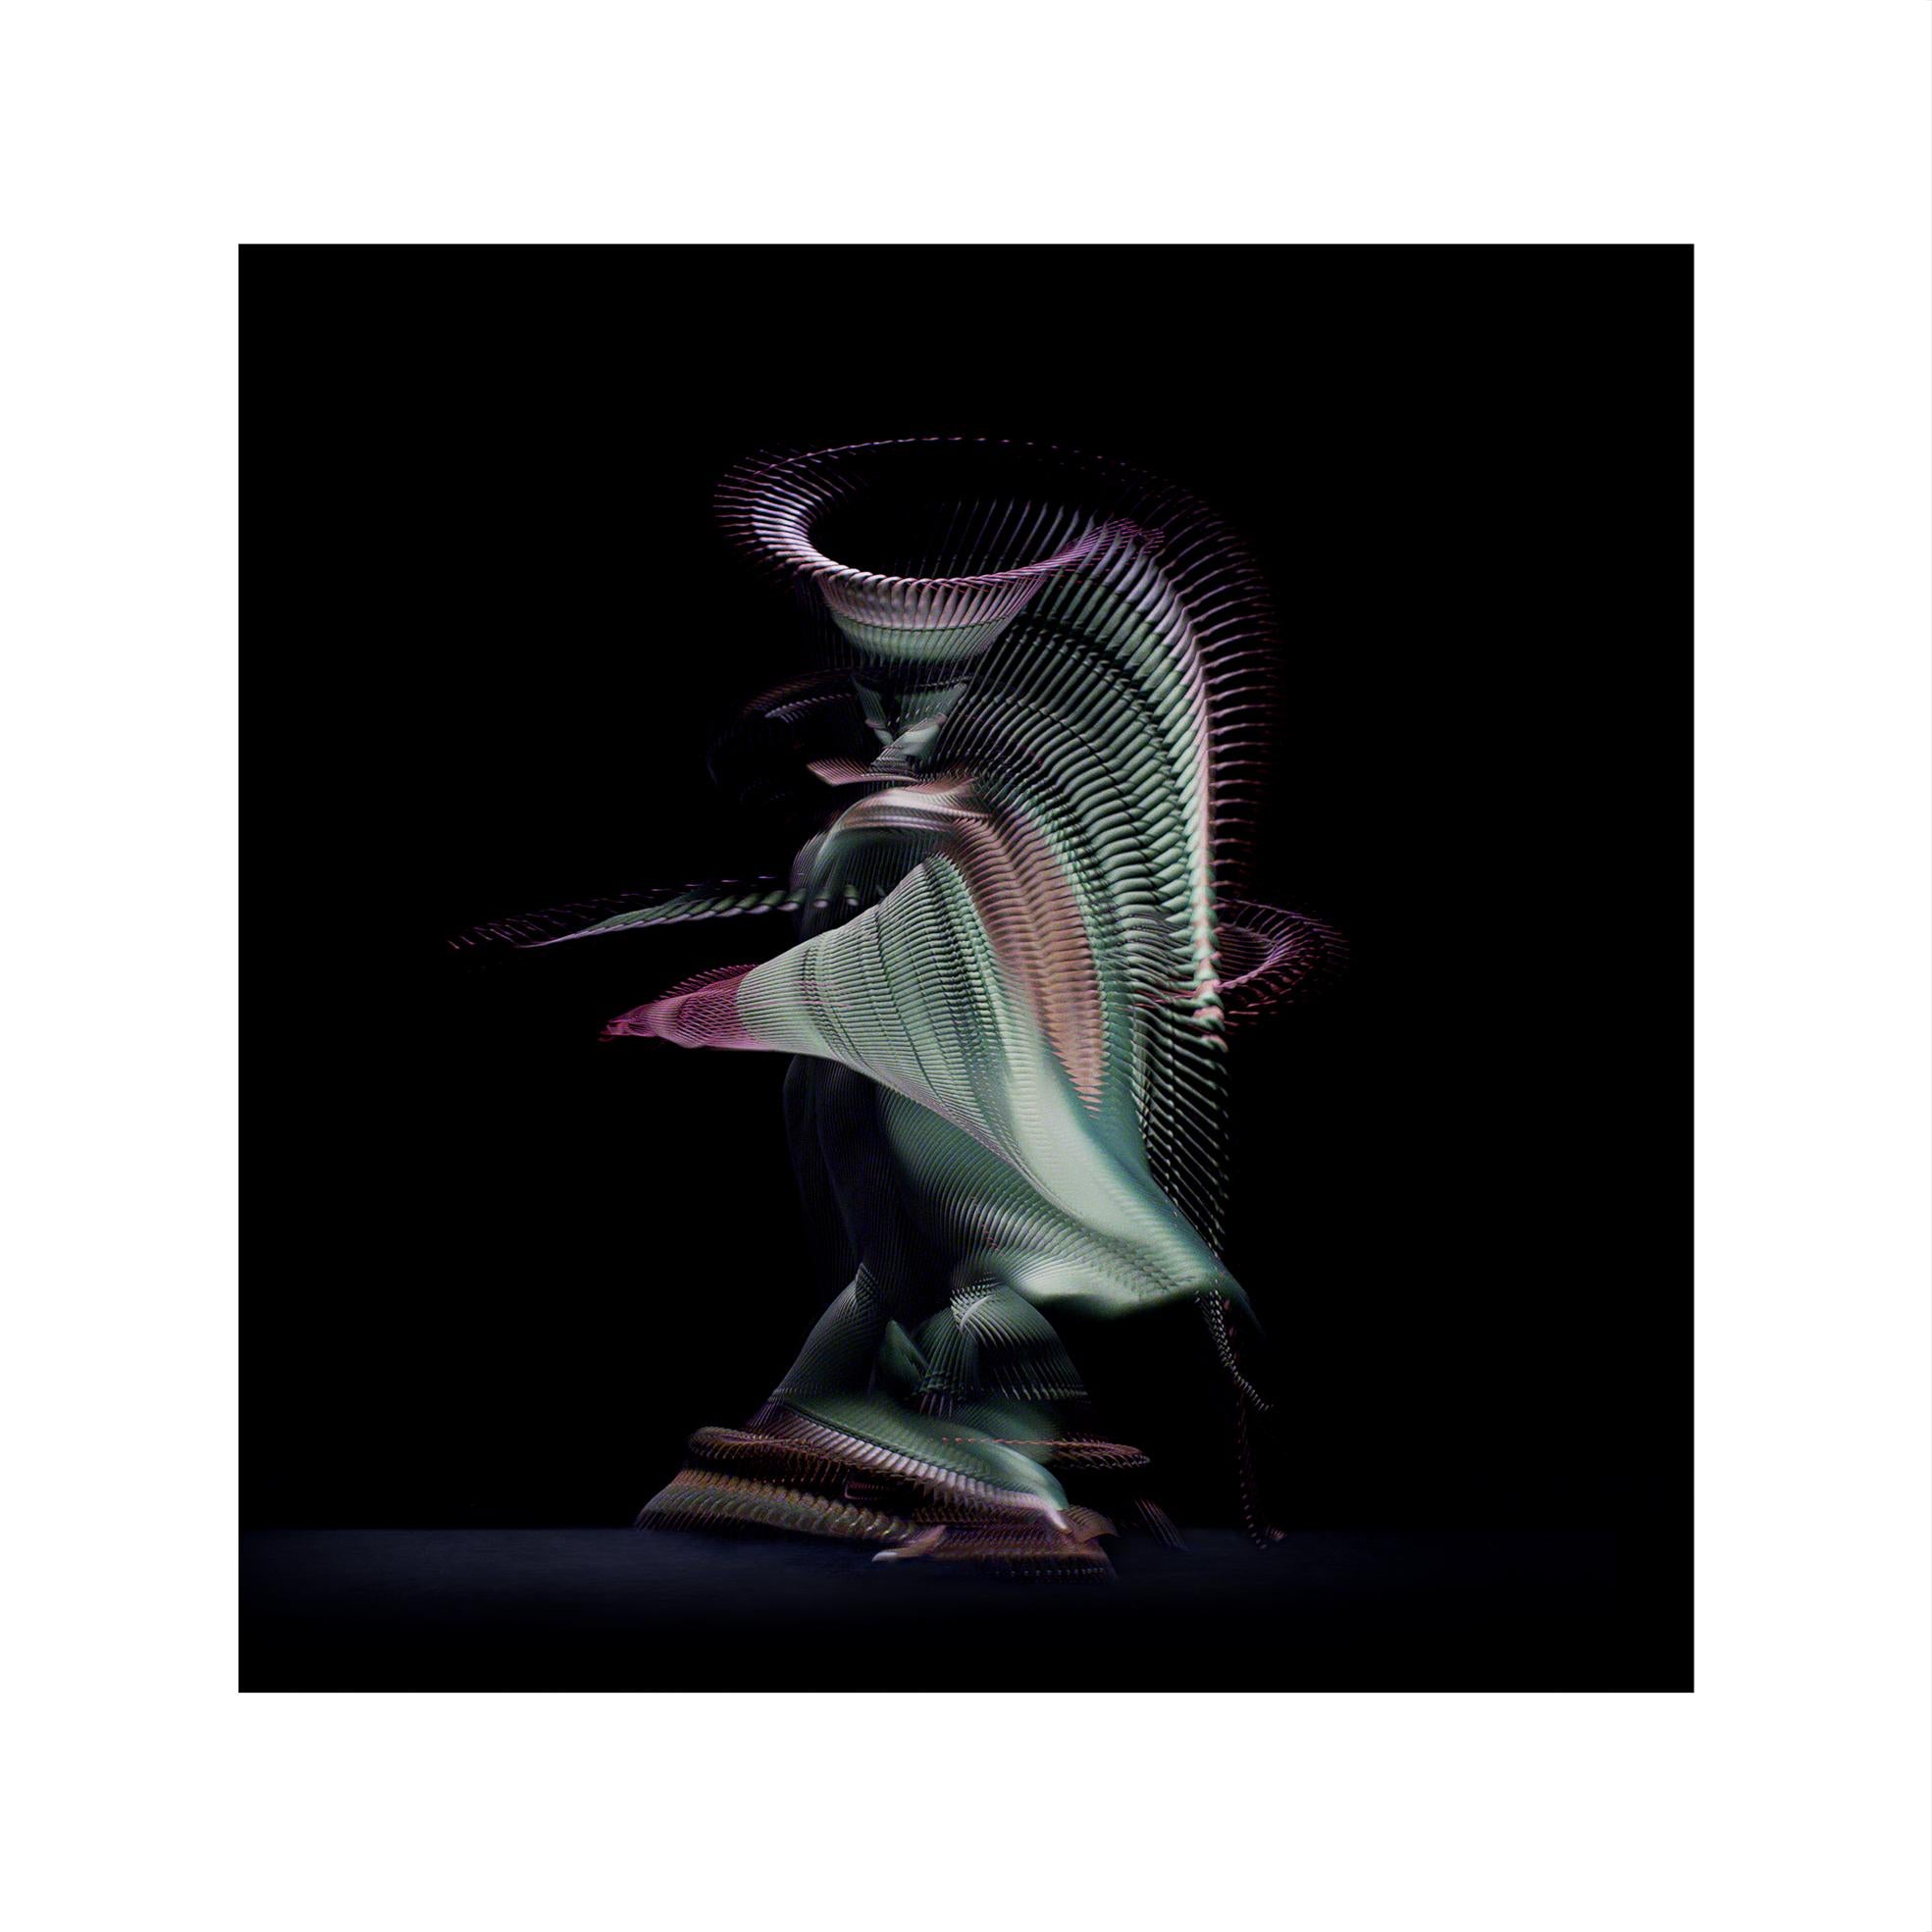 Giles Revell      Portrait Photograph - Abstract Dancers, Green 4, 2019 by Giles Revell - Photography, Contemporary, Art